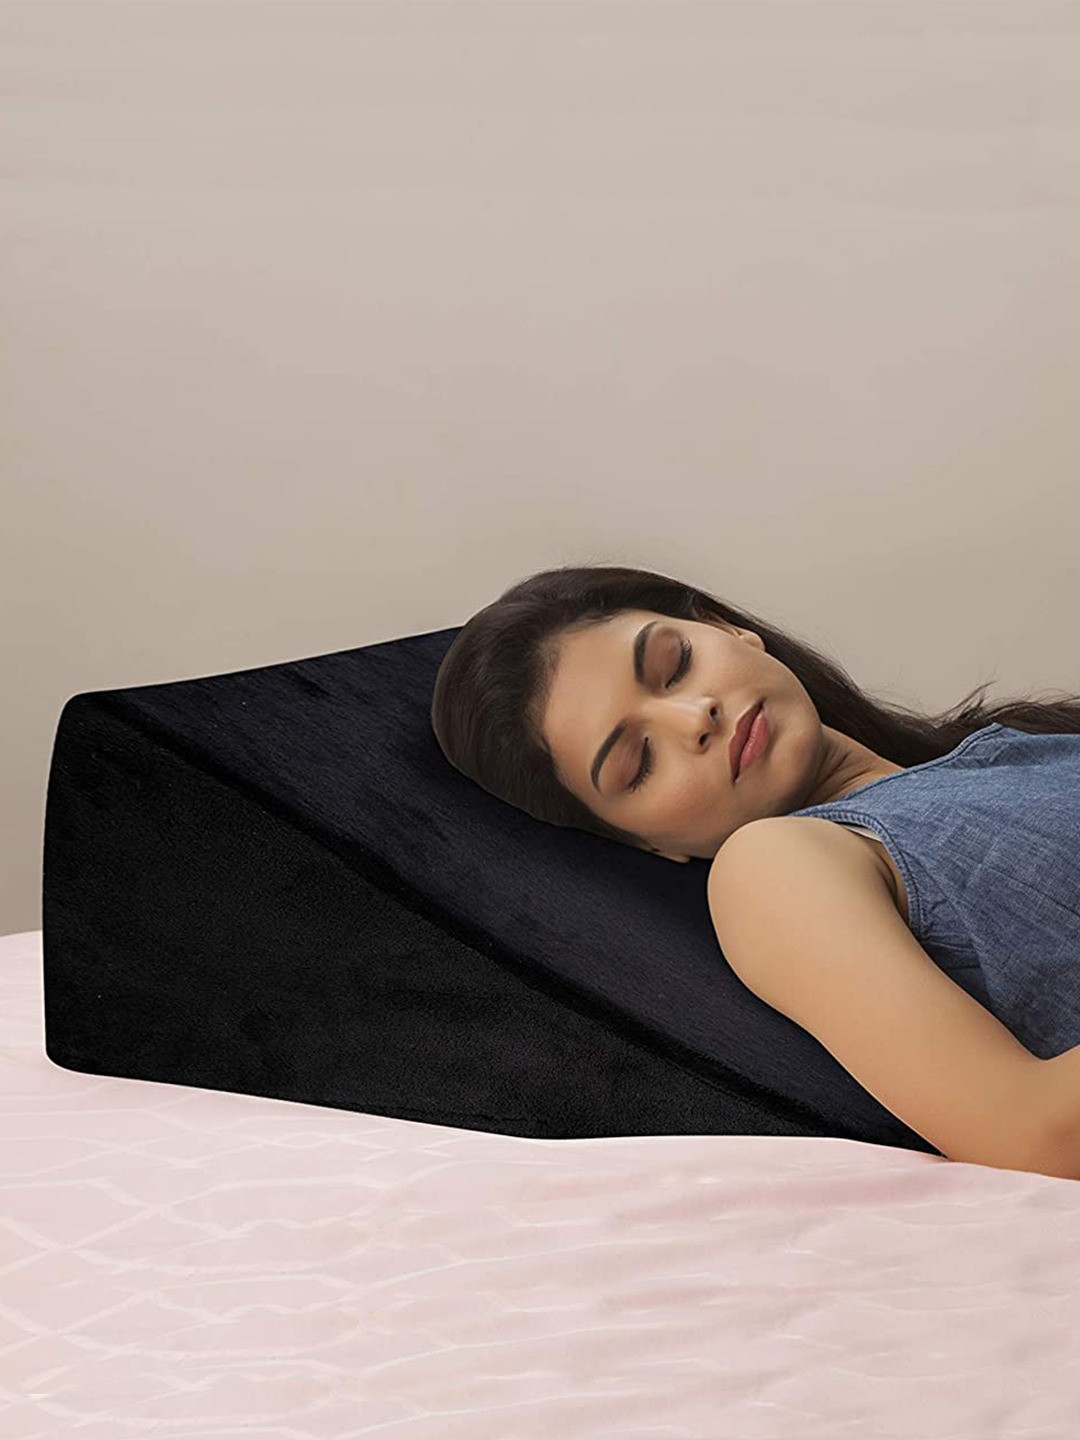 Kuber Industries Bed Wedge Pillow for Acid Reflux for Sleeping Helps in Heartburn Leg Elevation Post Surgery| Medical Grade Sponge | Washable Dryfit Soft Fabric Dark Colour Cover (Black)